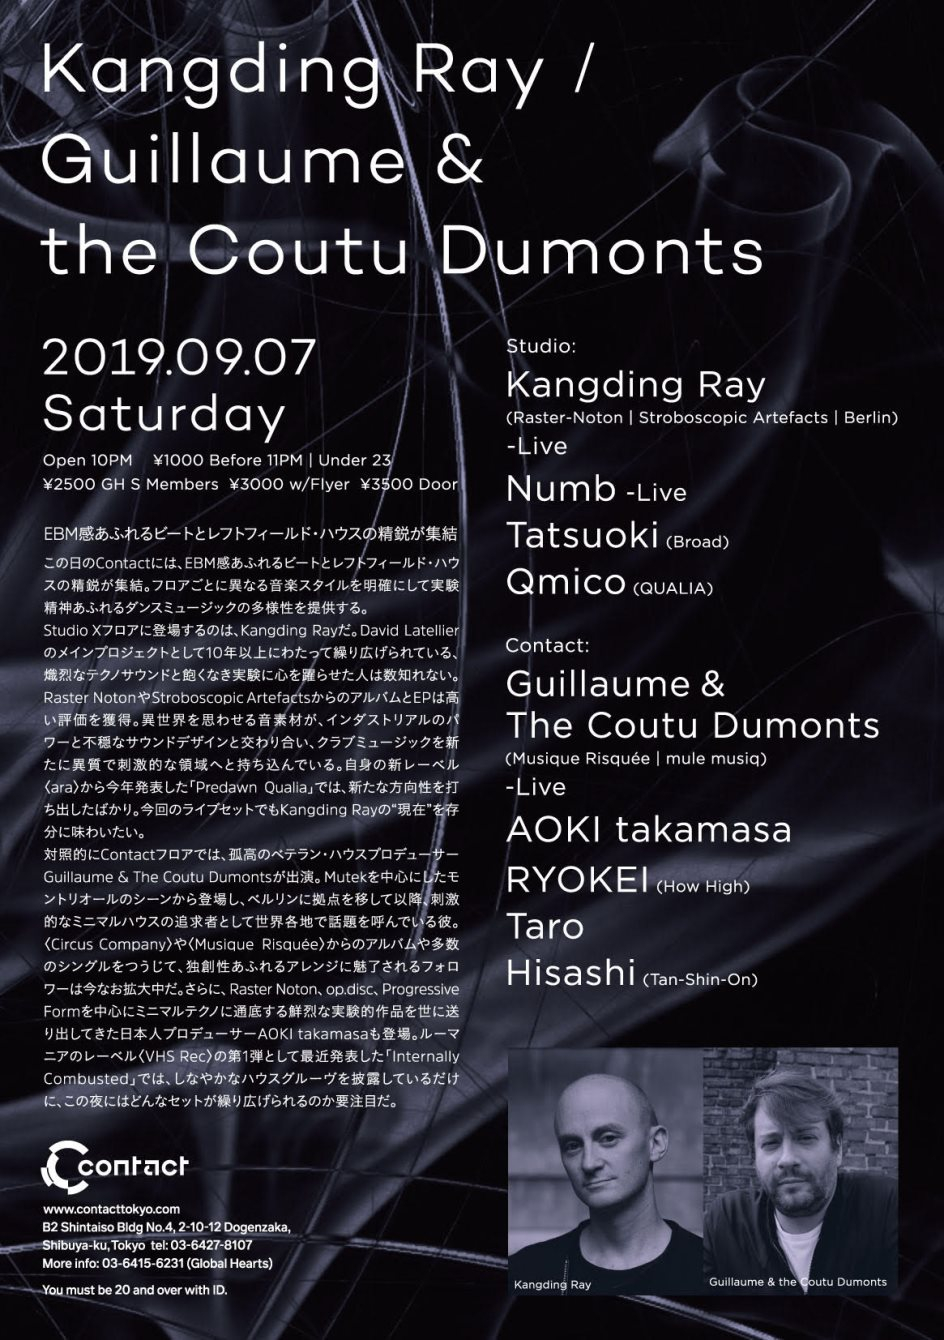 Kangding Ray / Guillaume & the Coutu Dumonts - Flyer back